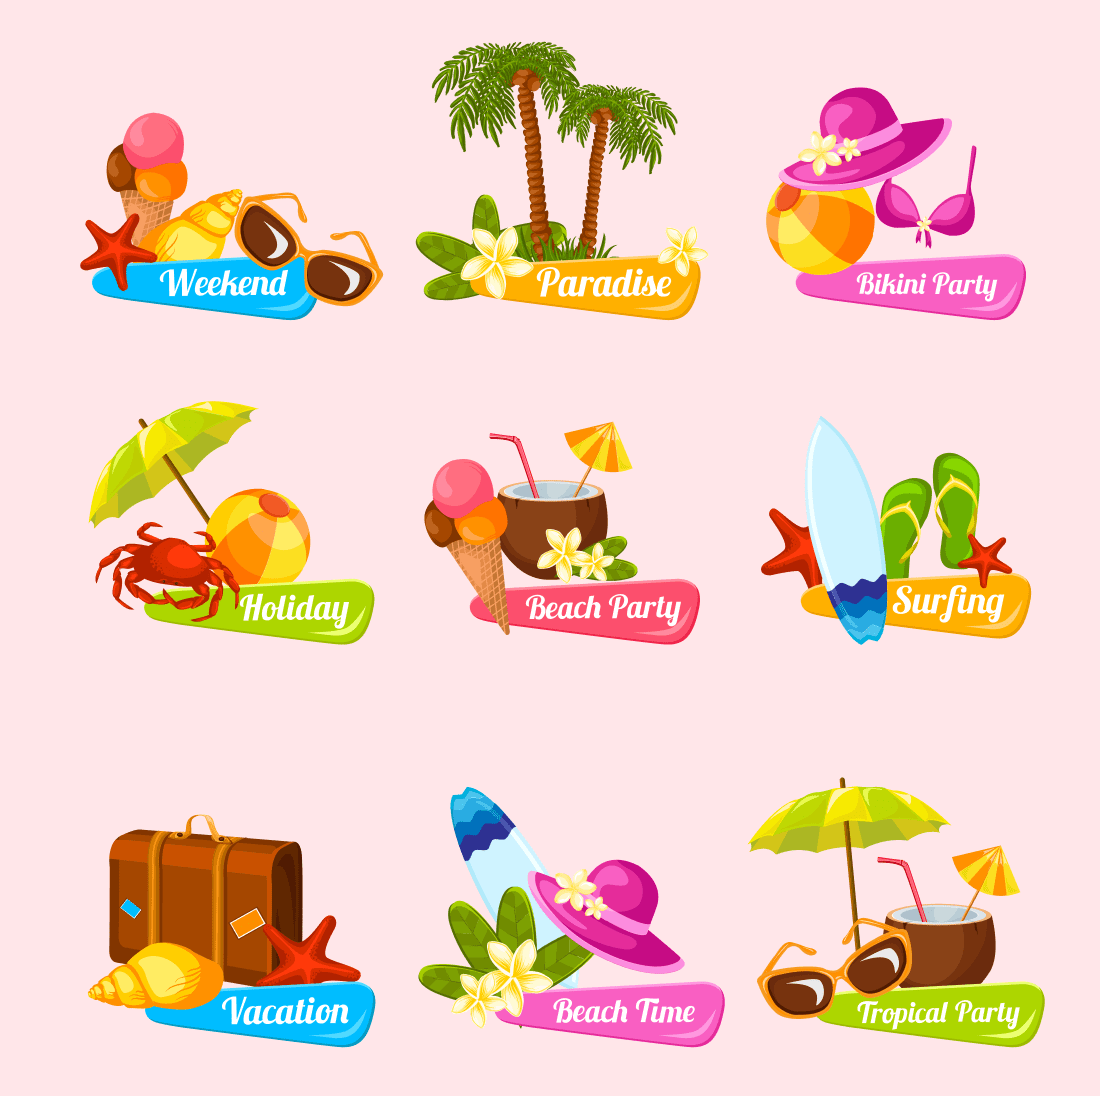 Summer vacation image with ice cream and suitcase.